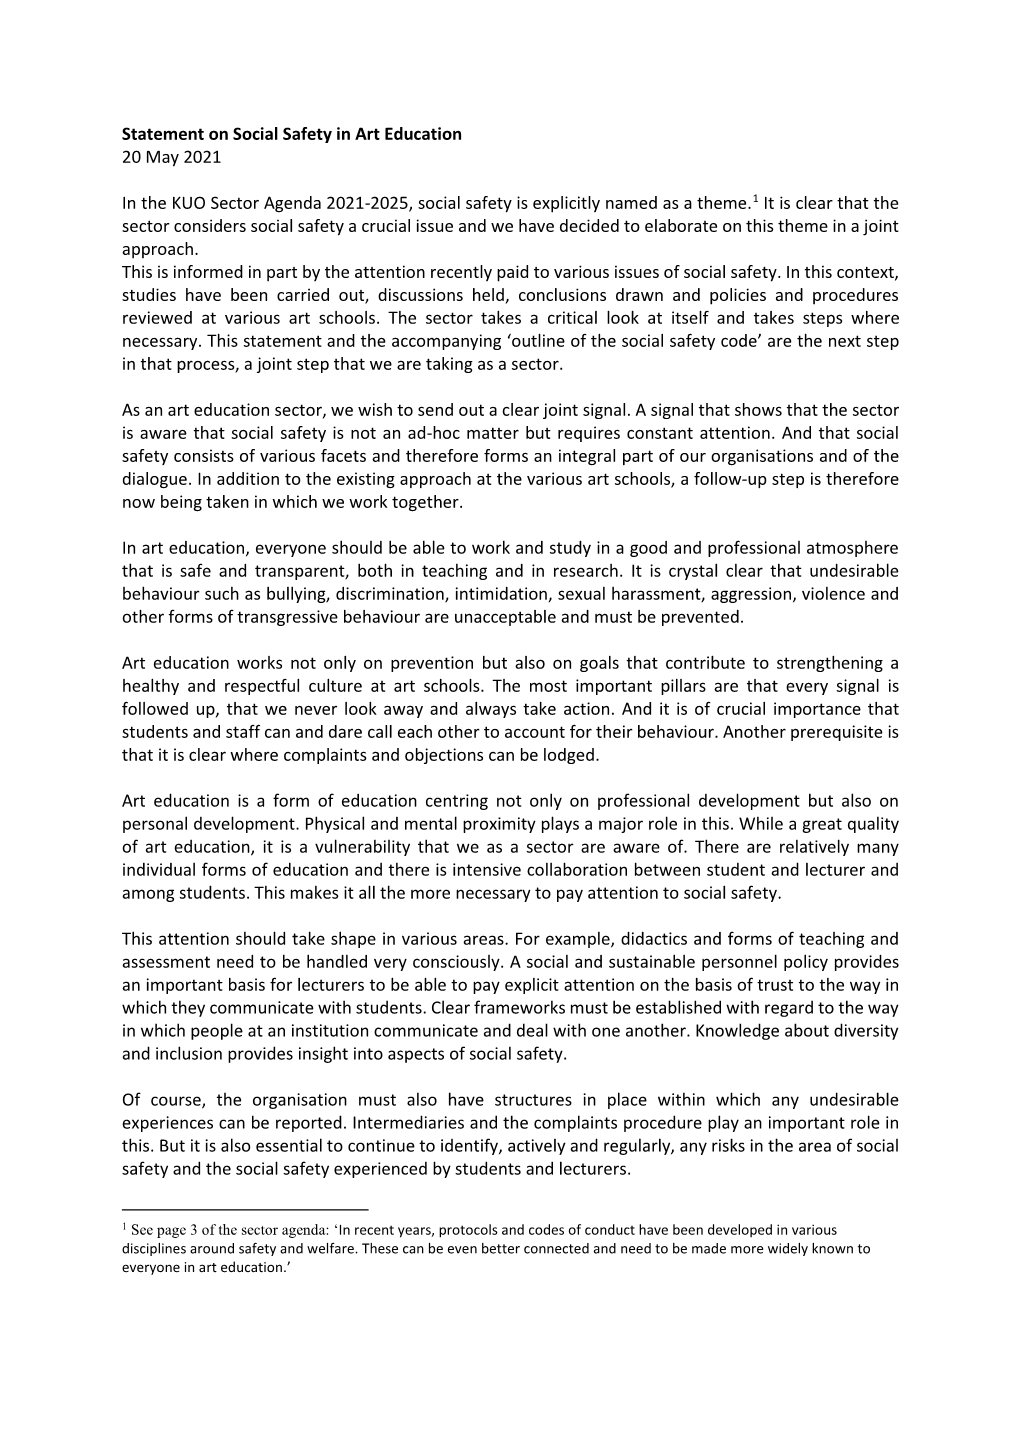 Statement on Social Safety in Art Education 20 May 2021